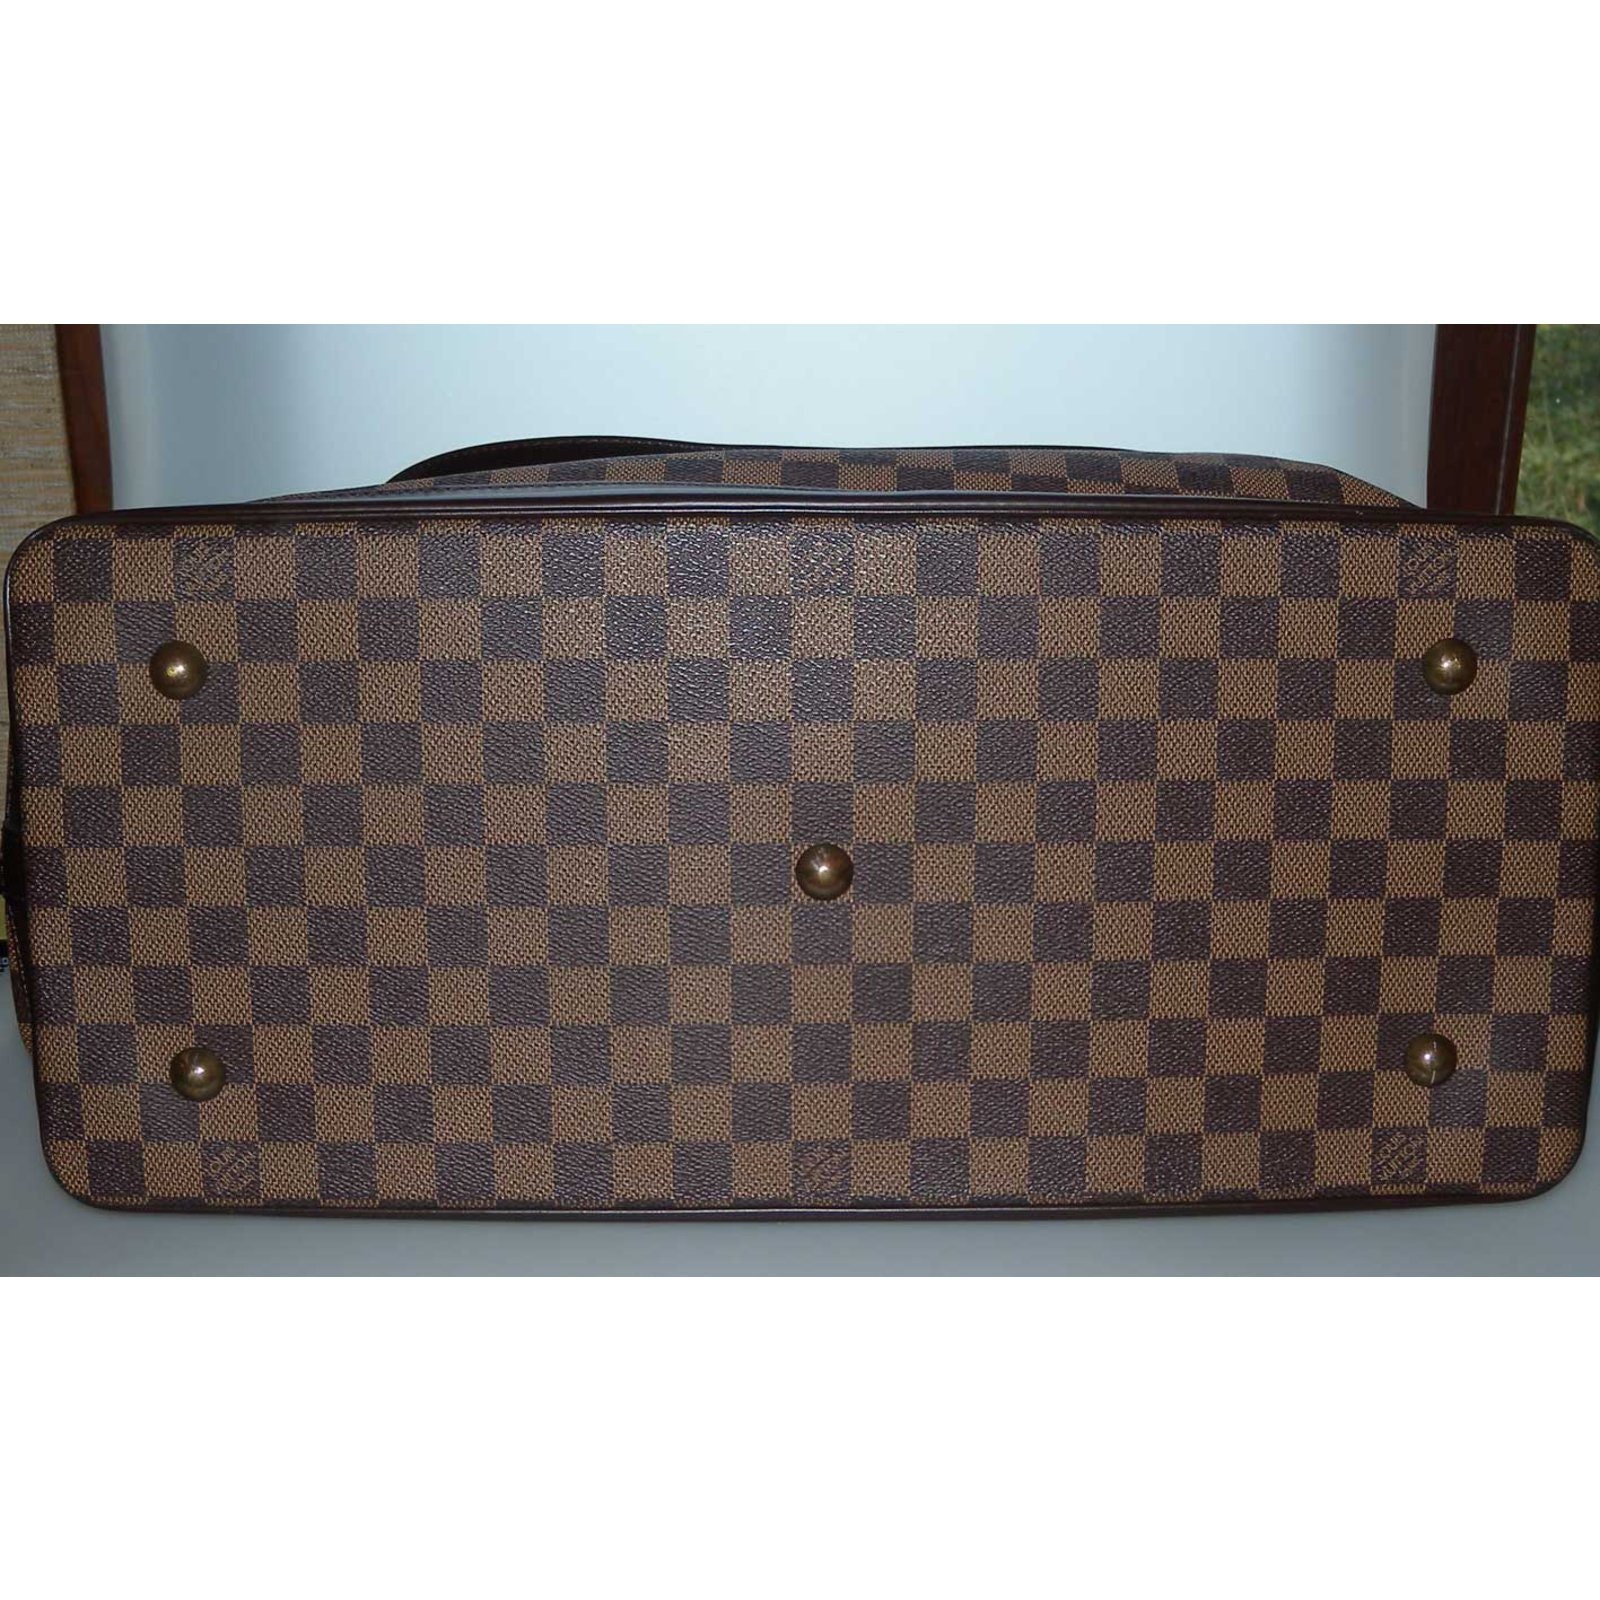 Louis Vuitton West End Carry On Travel Bag –